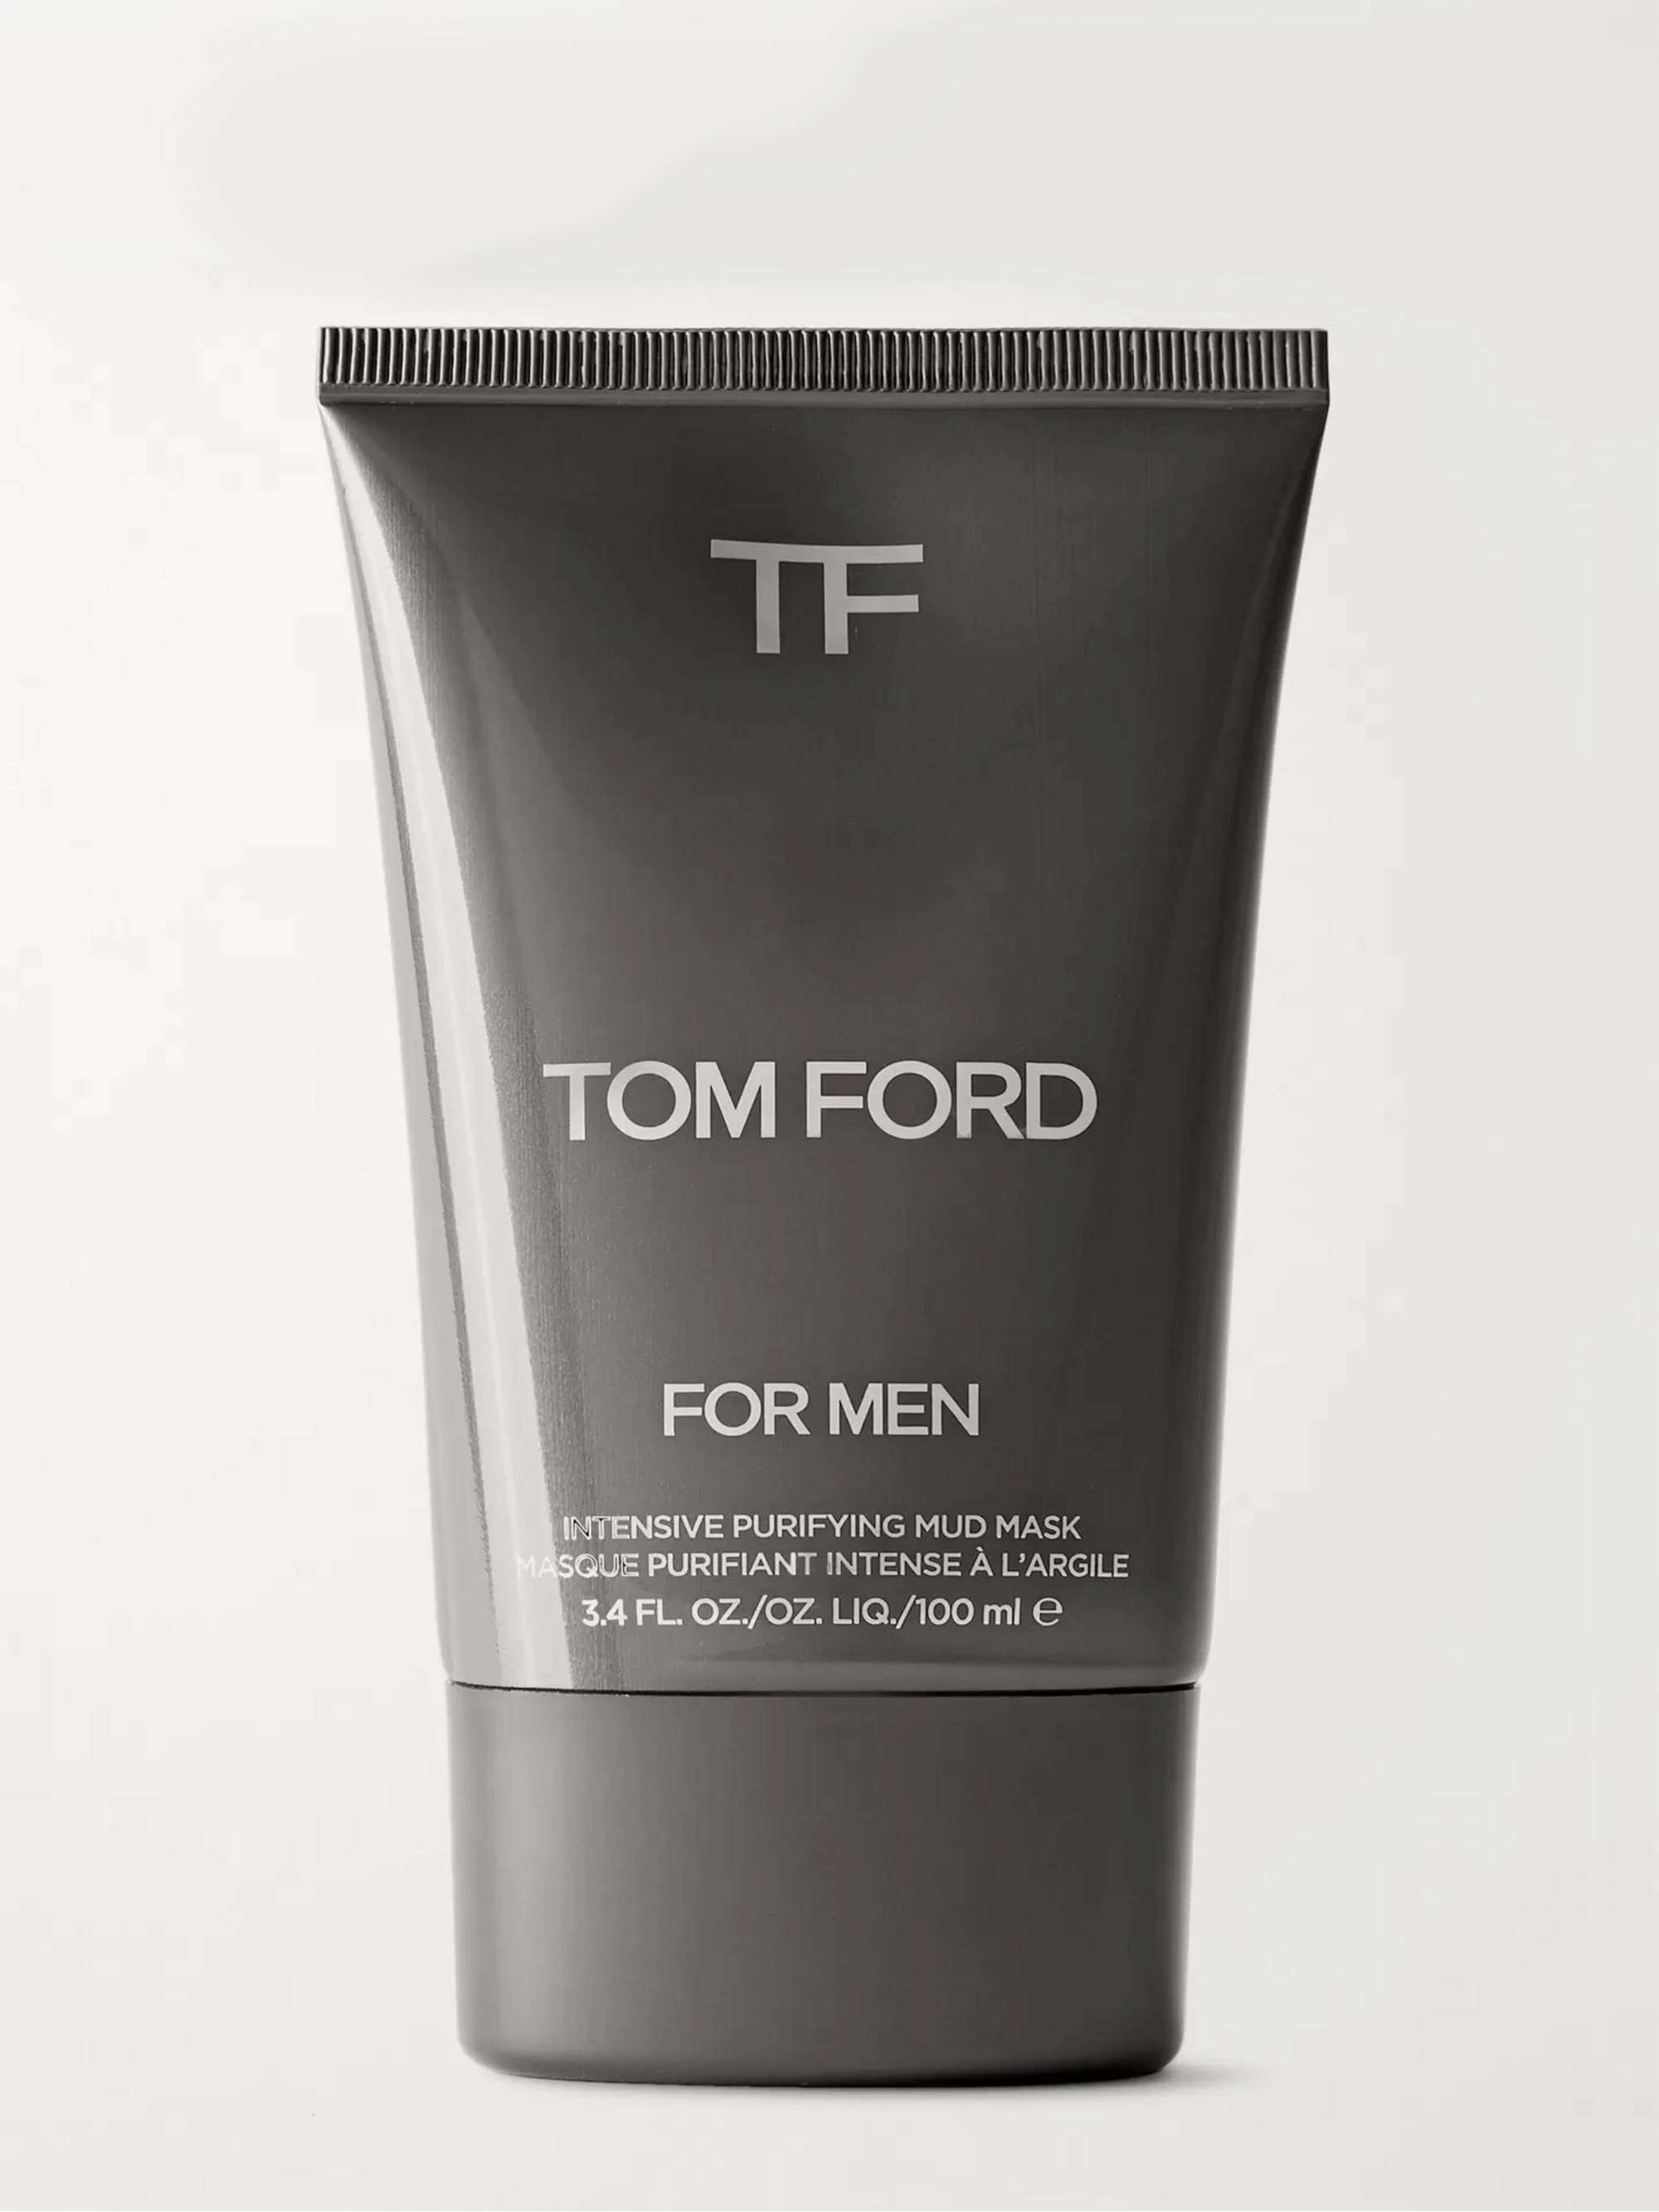 TOM FORD BEAUTY Intensive Purifying Mud Mask, 100ml